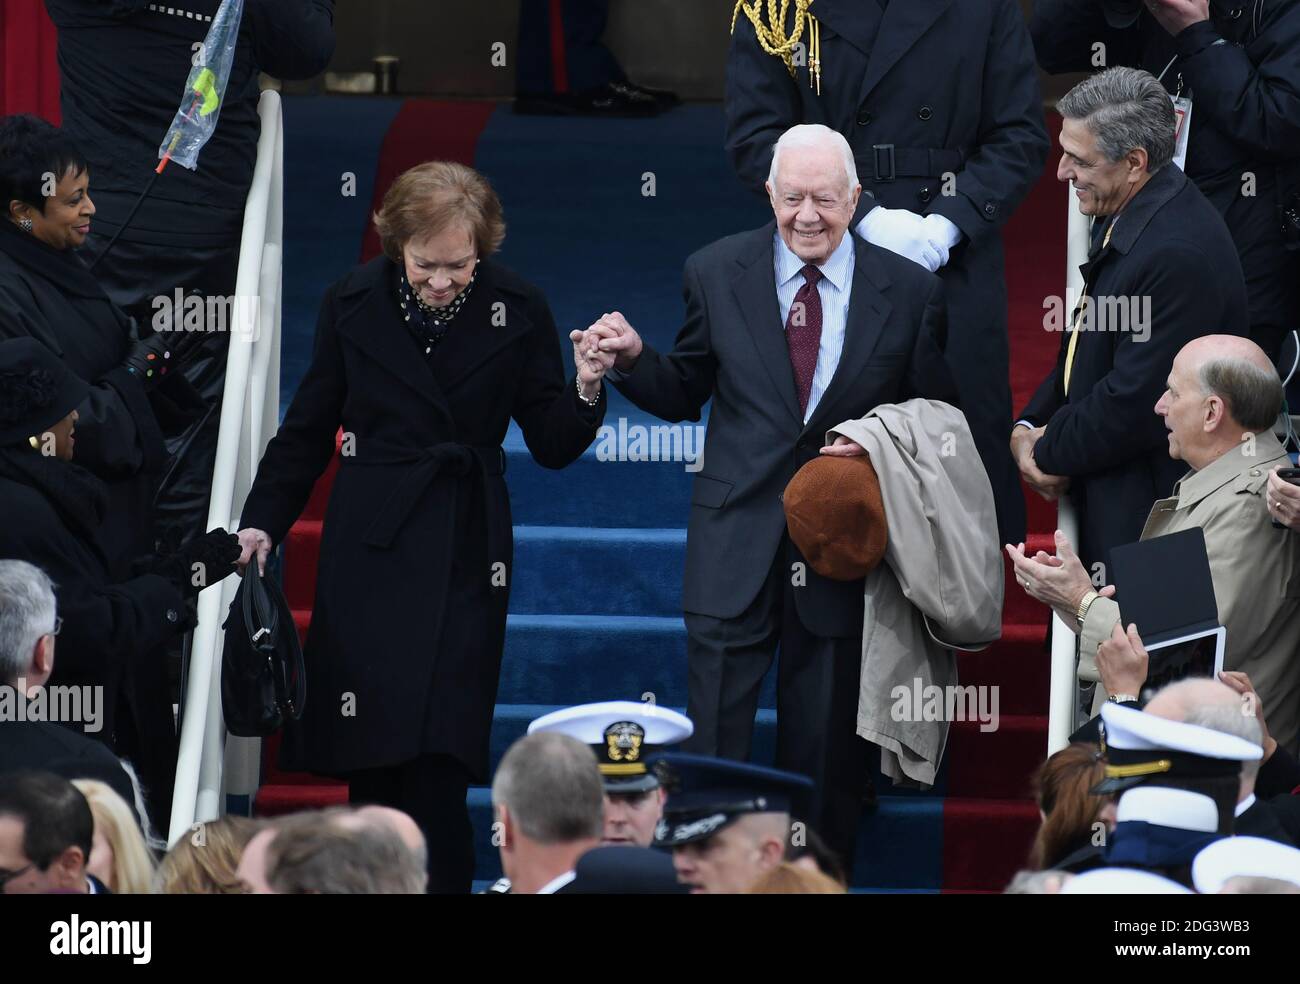 Former President Jimmy Carter and wife Rosalynn walk down the steps during the Inauguration Ceremony of President Donald Trump on the West Front of the U.S. Capitol on January 20, 2017 in Washington, D.C. Trump became the 45th President of the United States. Photo by Pat Benic/UPI Stock Photo